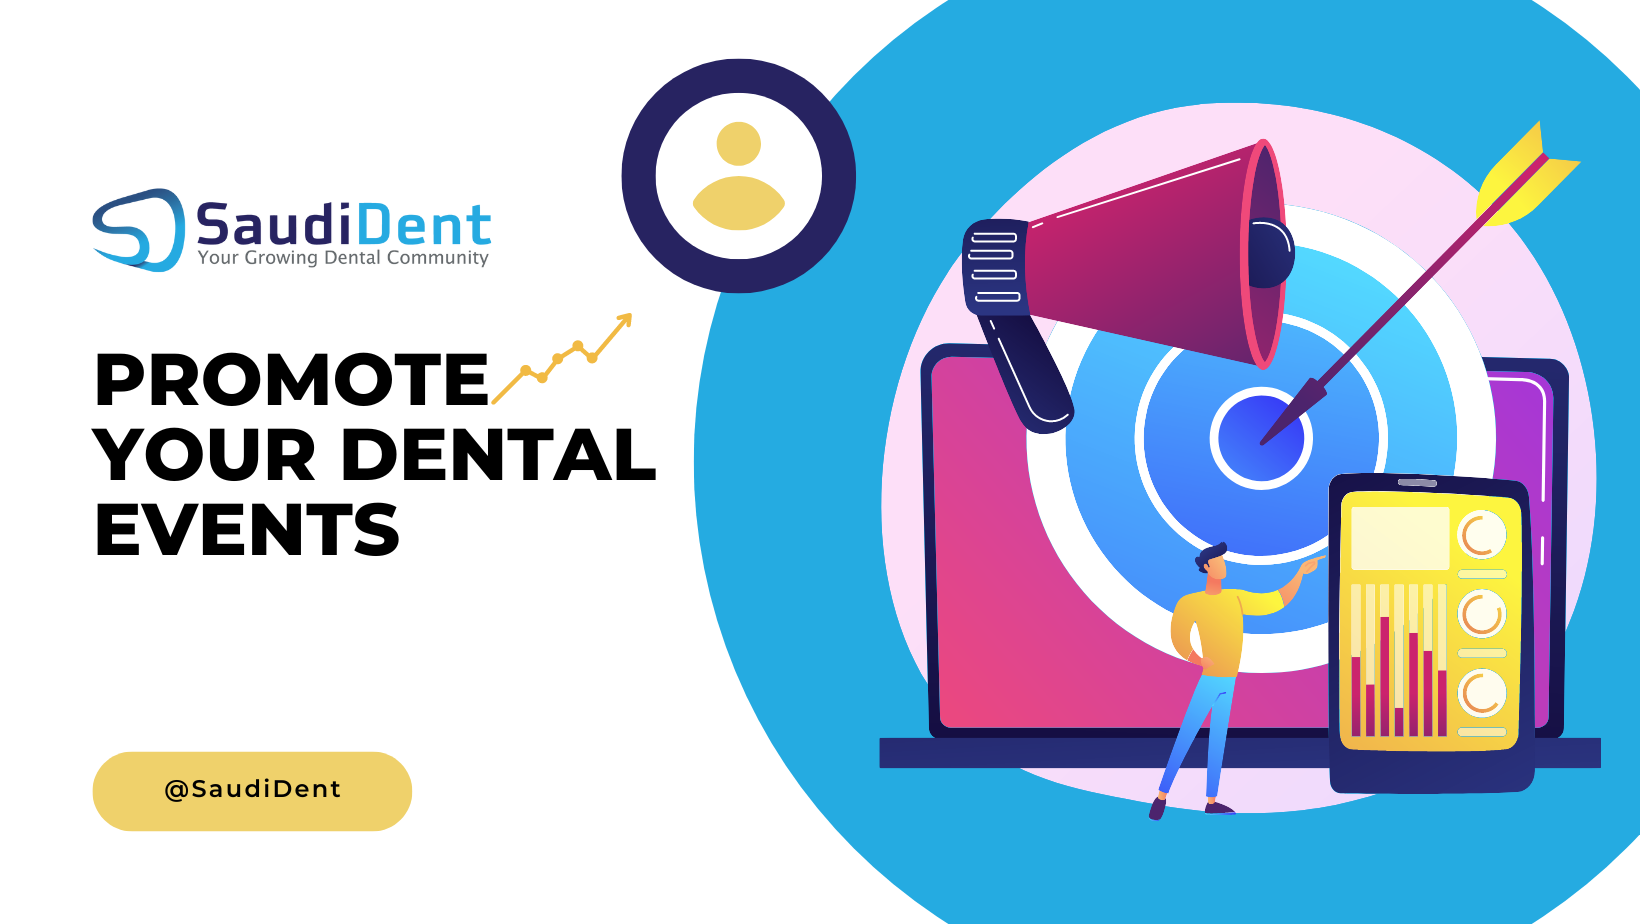 Discover the Latest Dental Events: Get Featured in Our Curated List